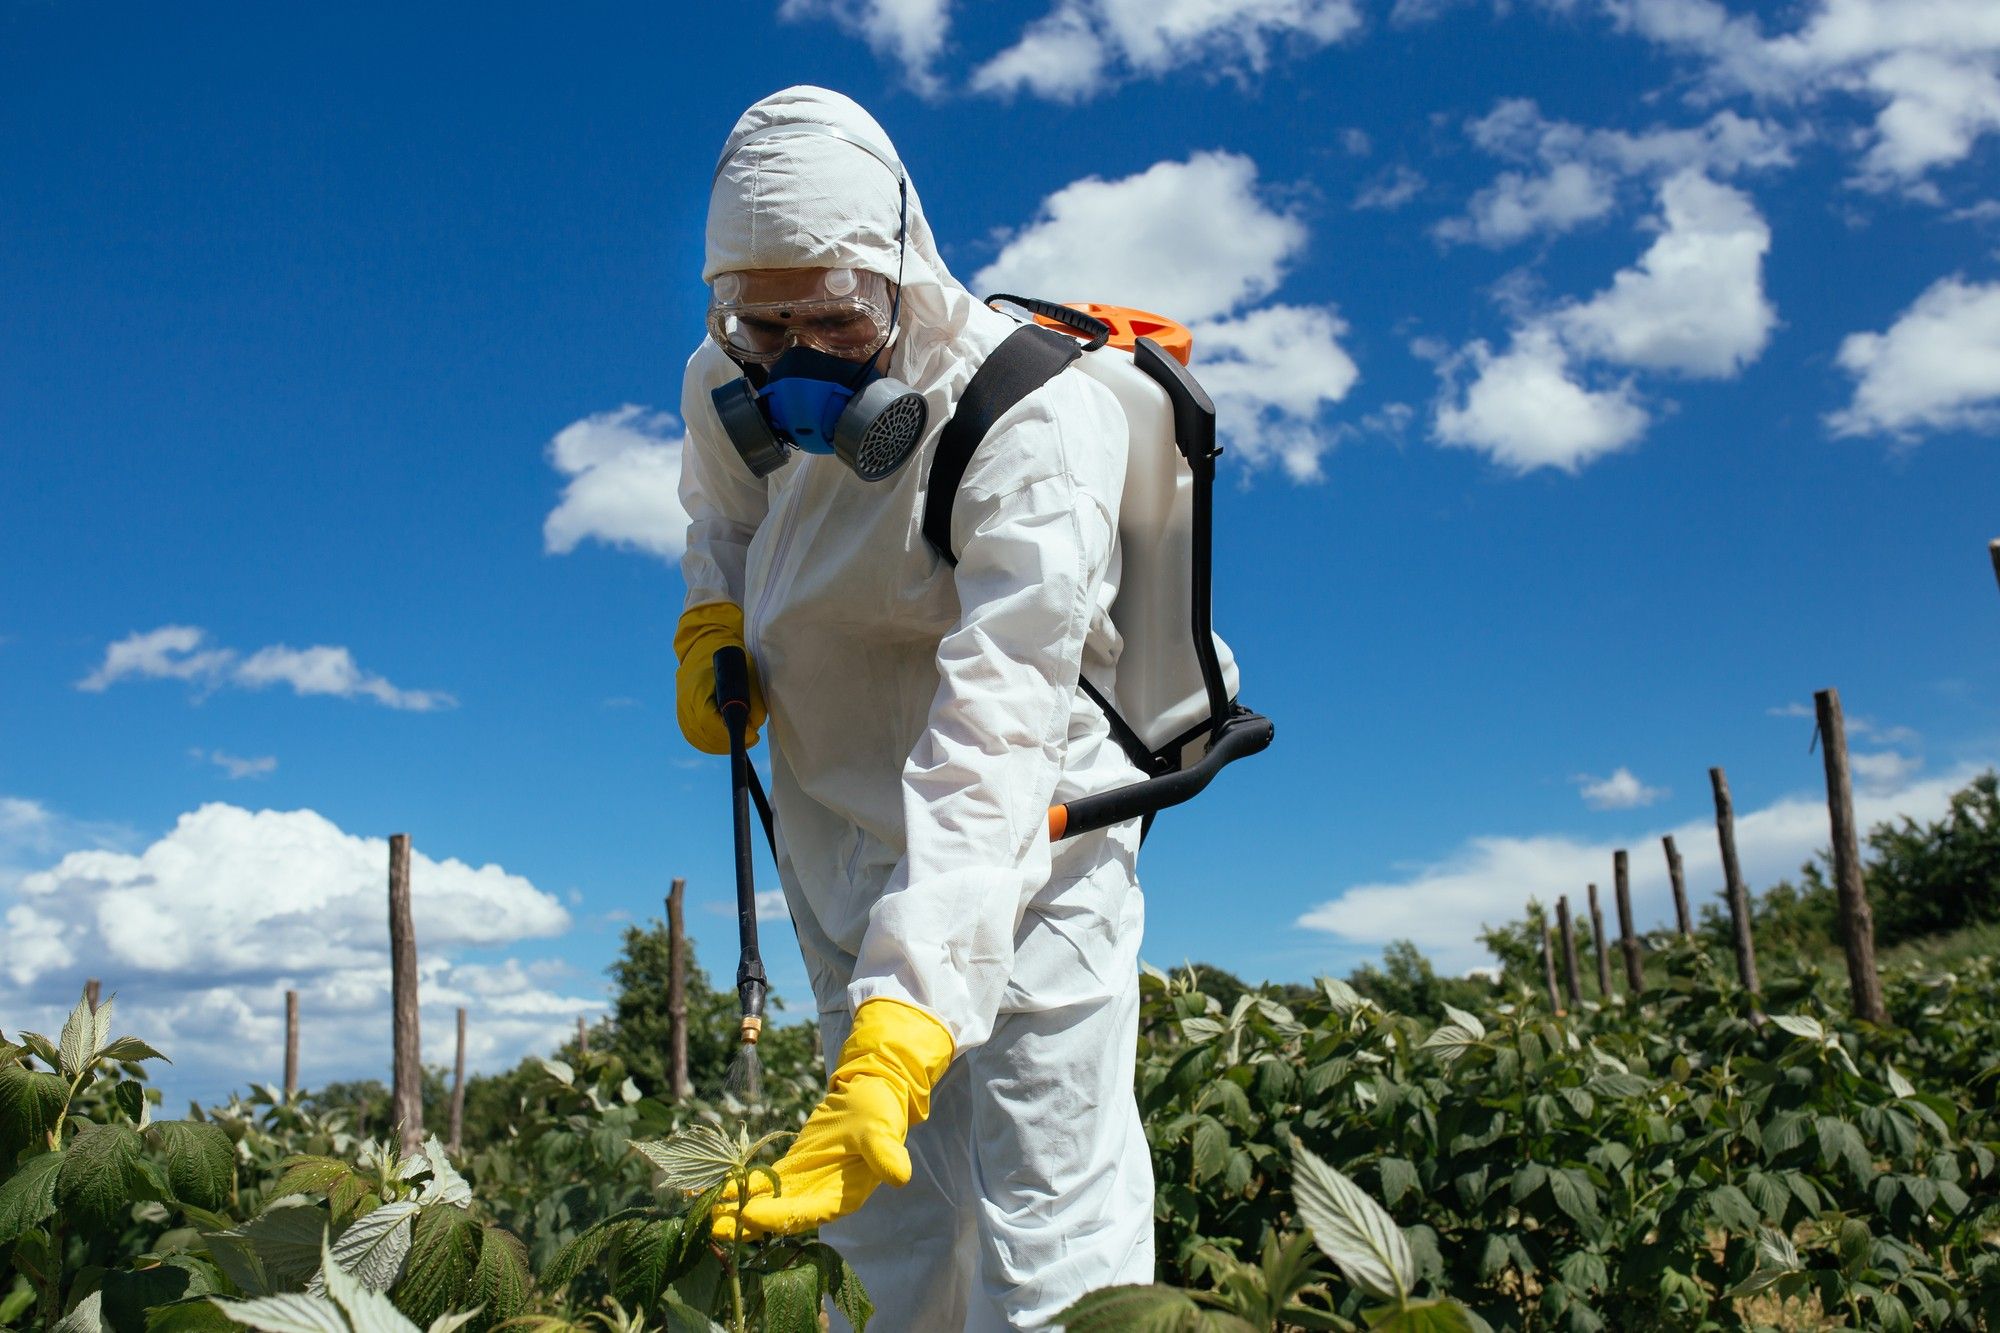 Roundup herbicide is the subject of numerous lawsuits.